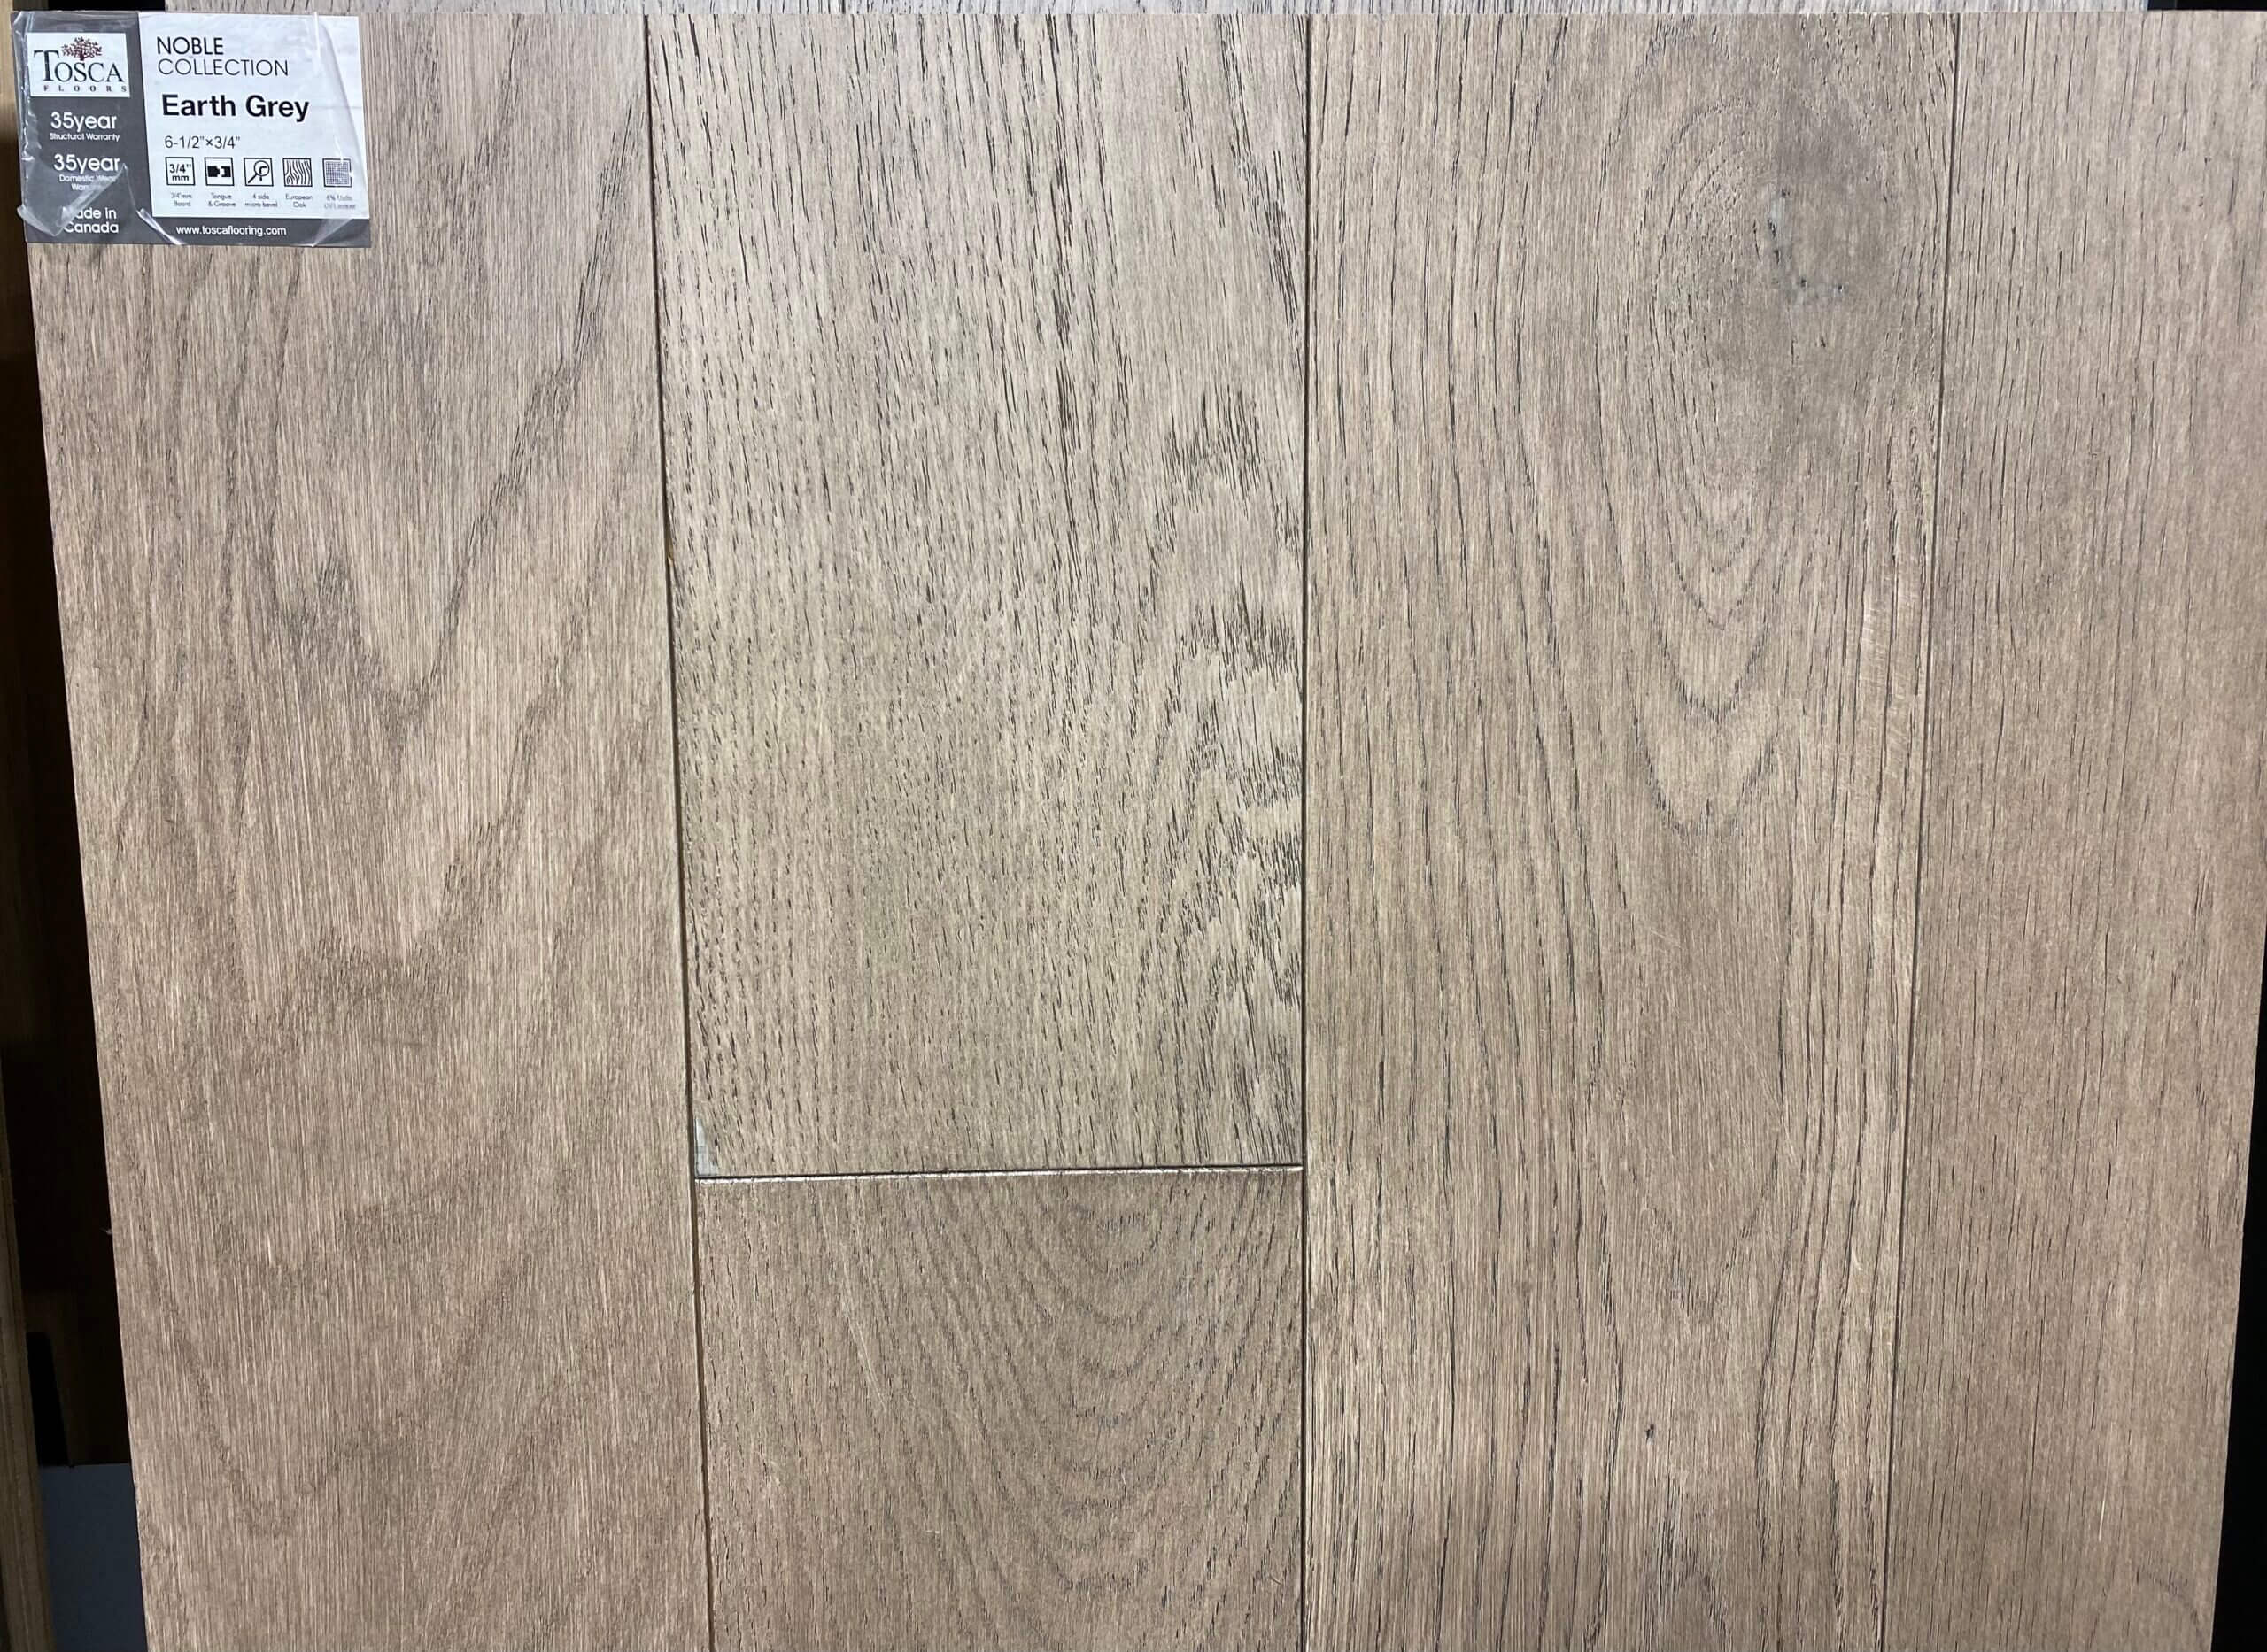 Tosca Engineered Flooring Noble Collection Earth Grey 6 ½” x ¾”